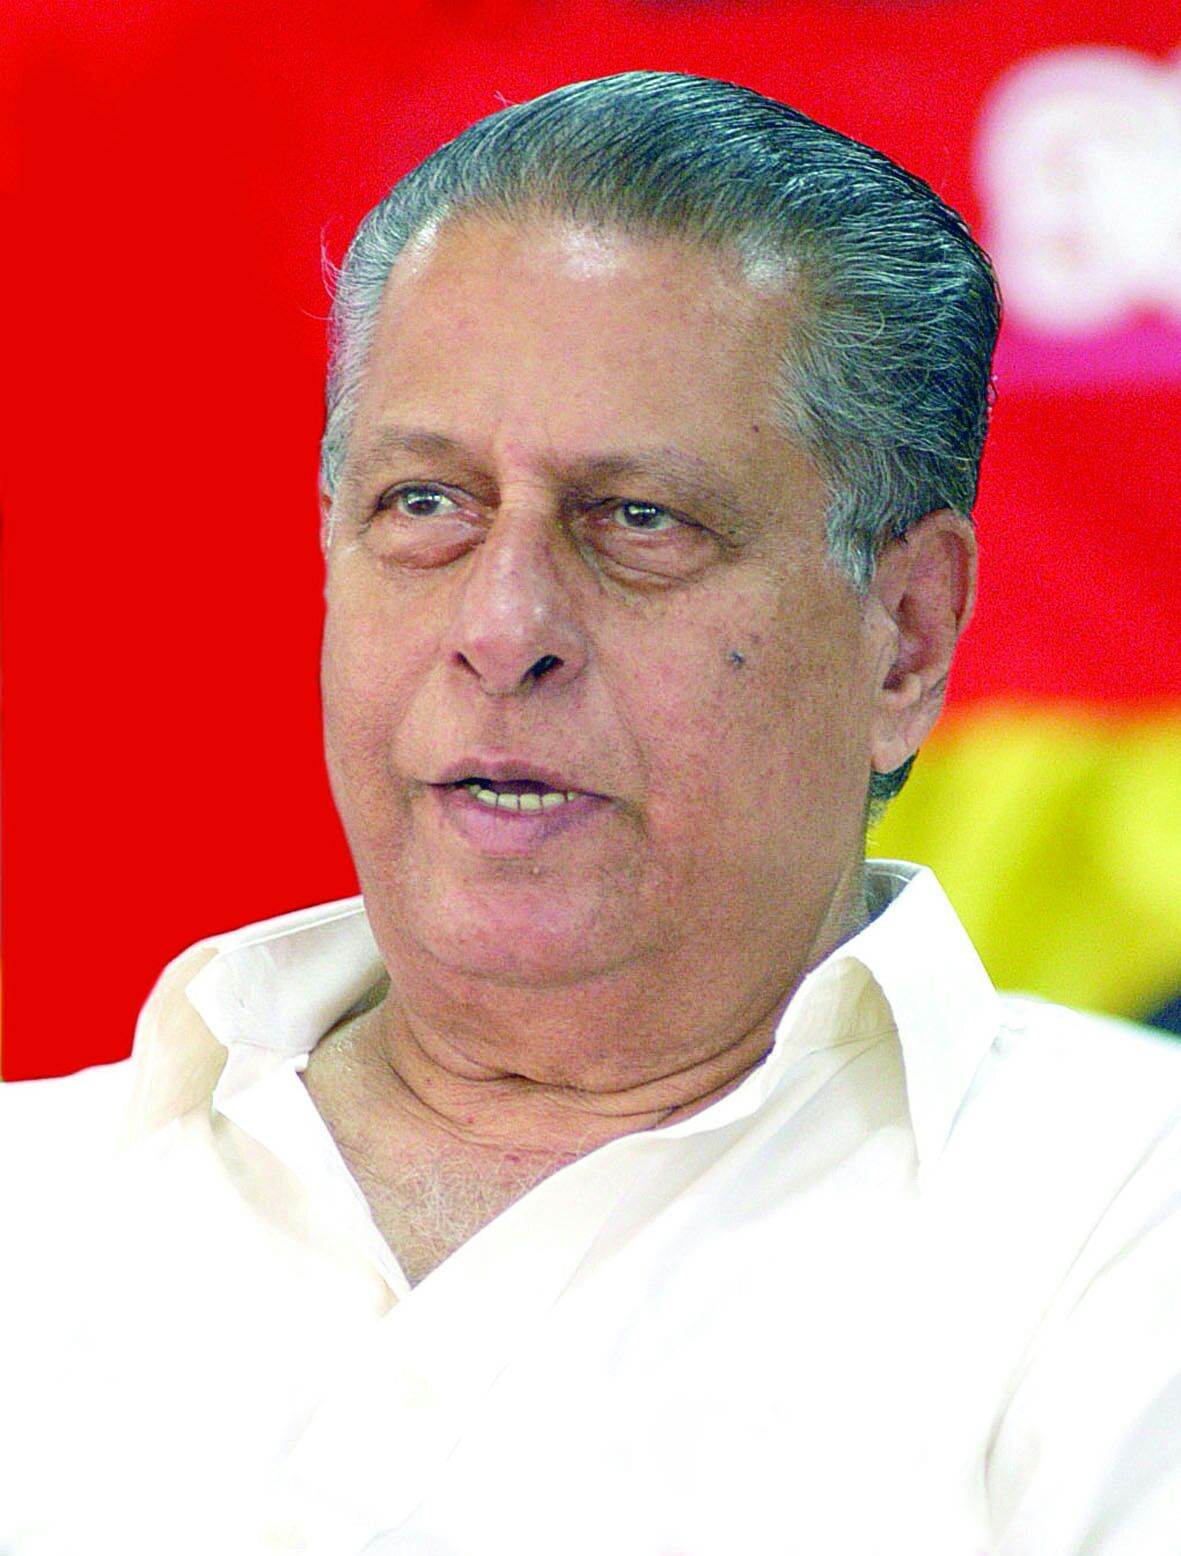 CMP leader asks LDF to clarify its stand